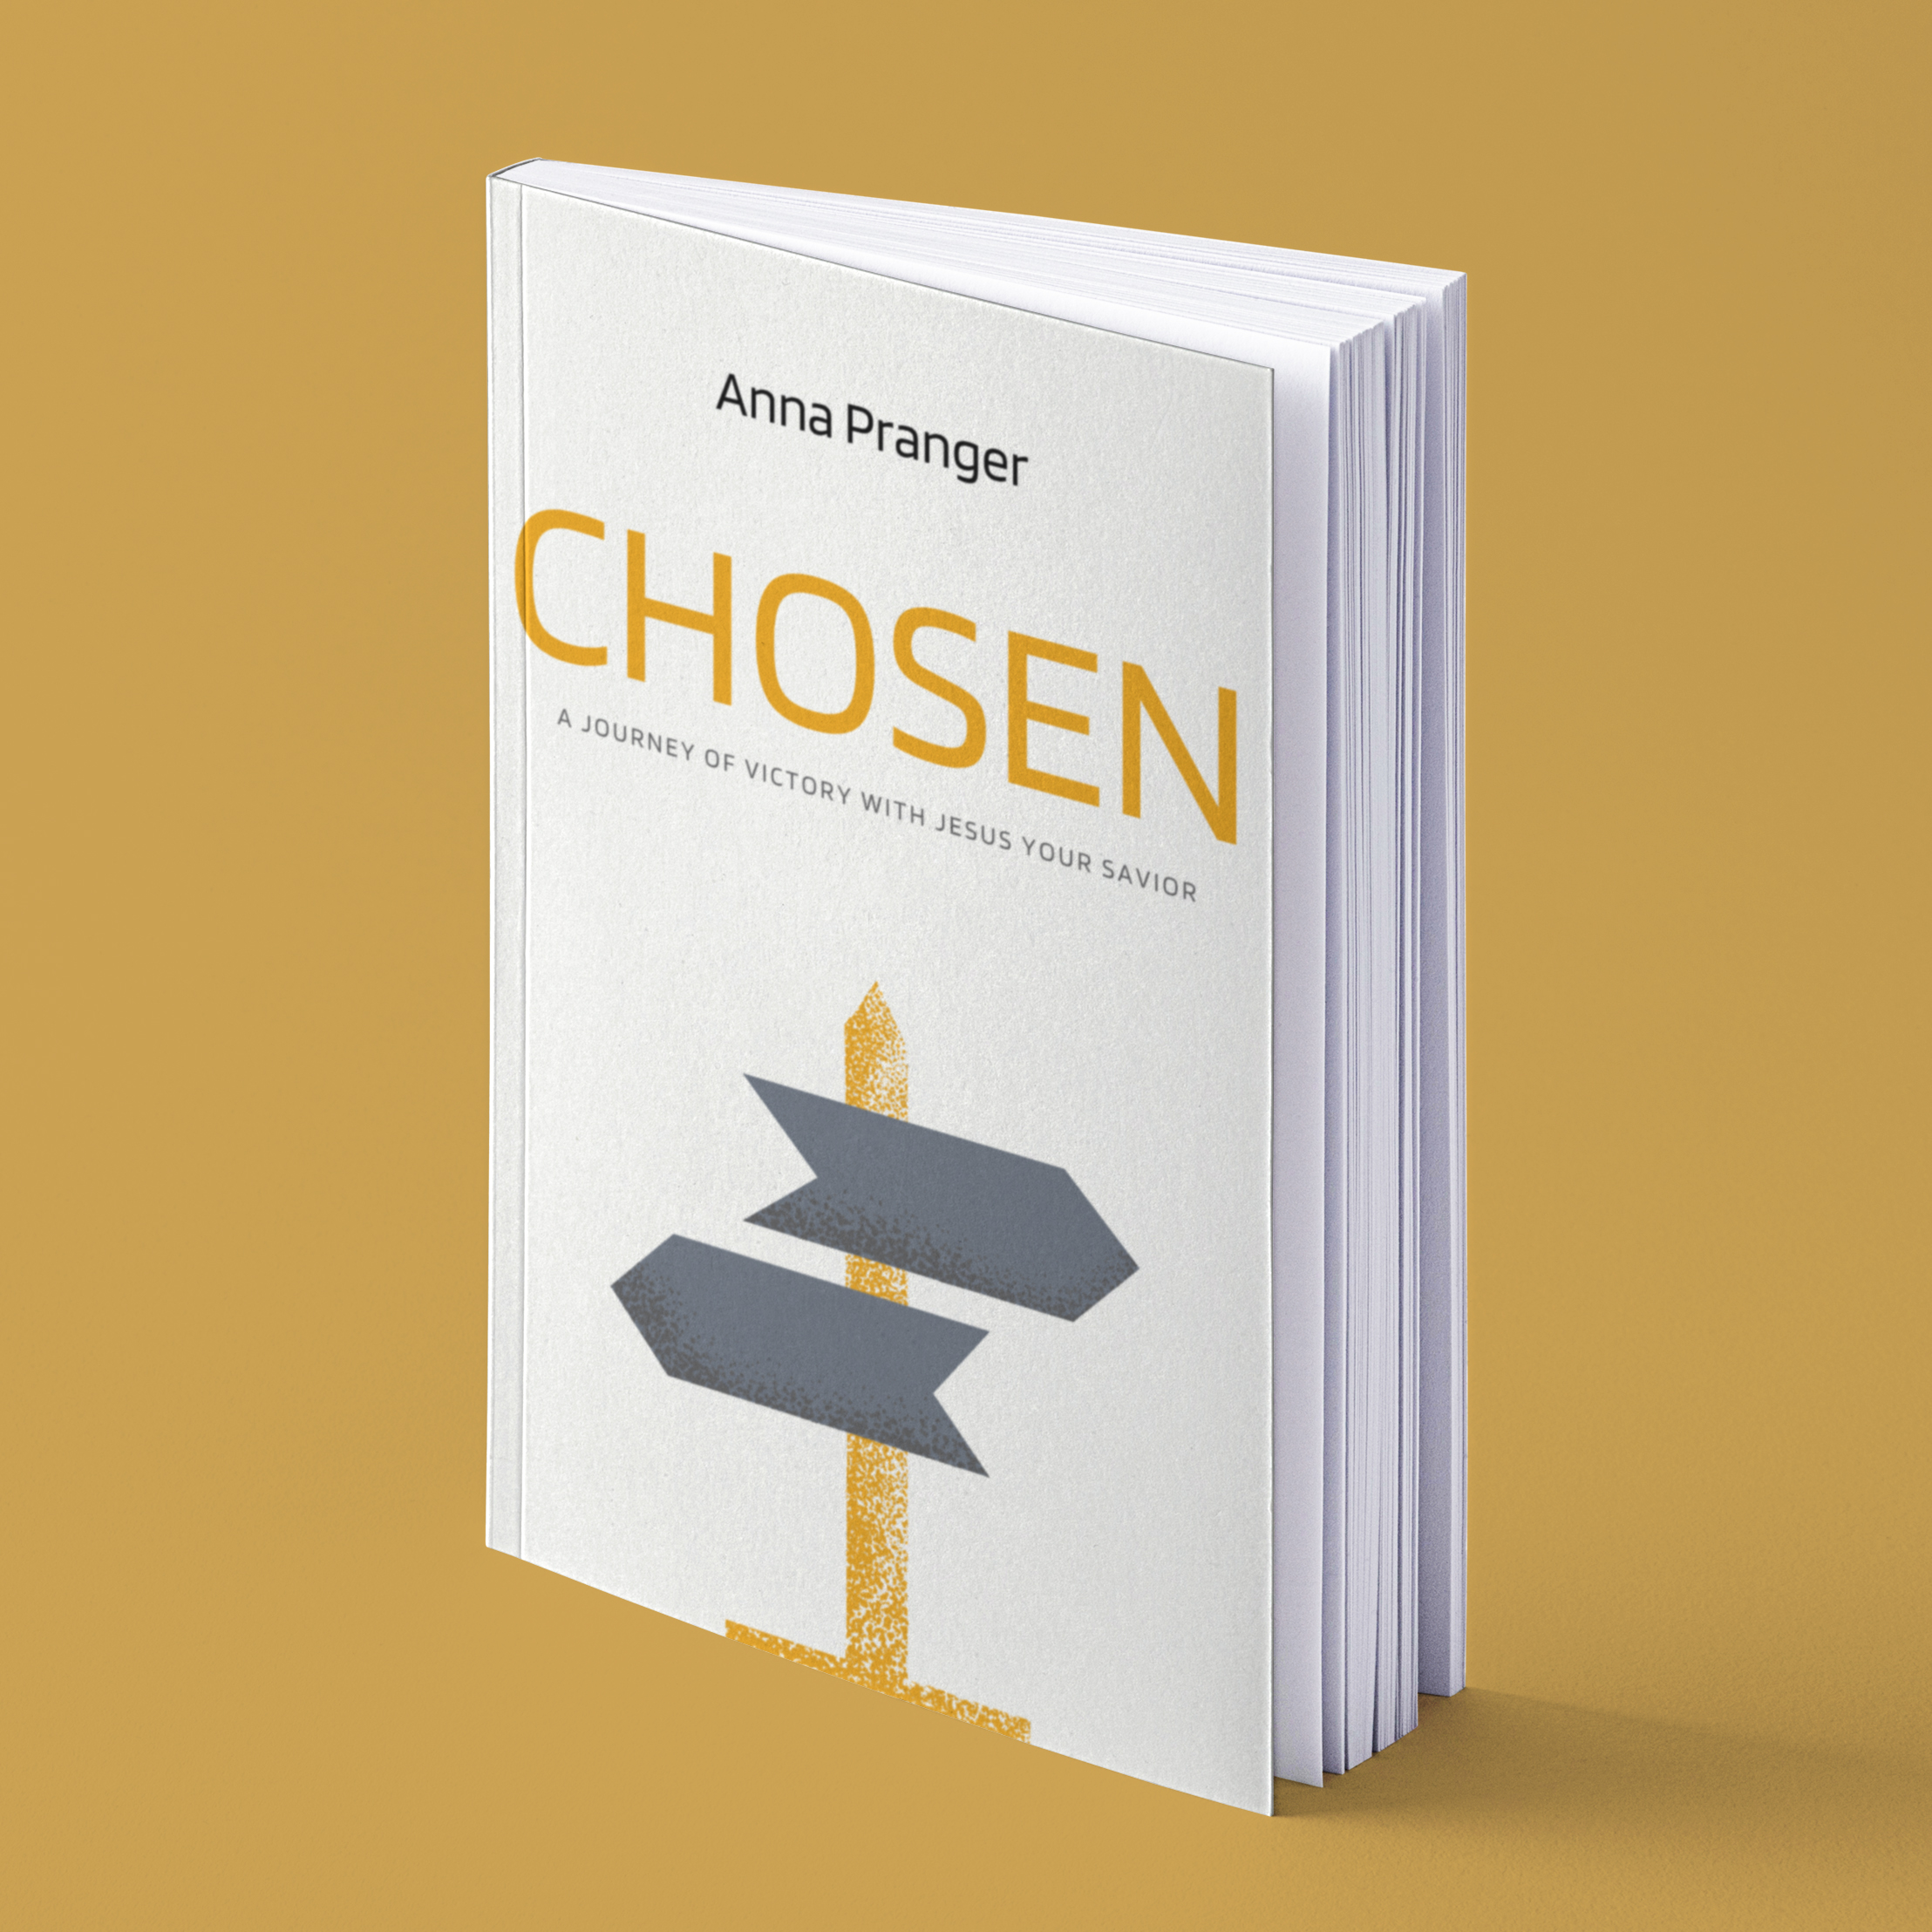 Chosen: A Journey of Victory with Jesus Your Savior. By Anna Pranger